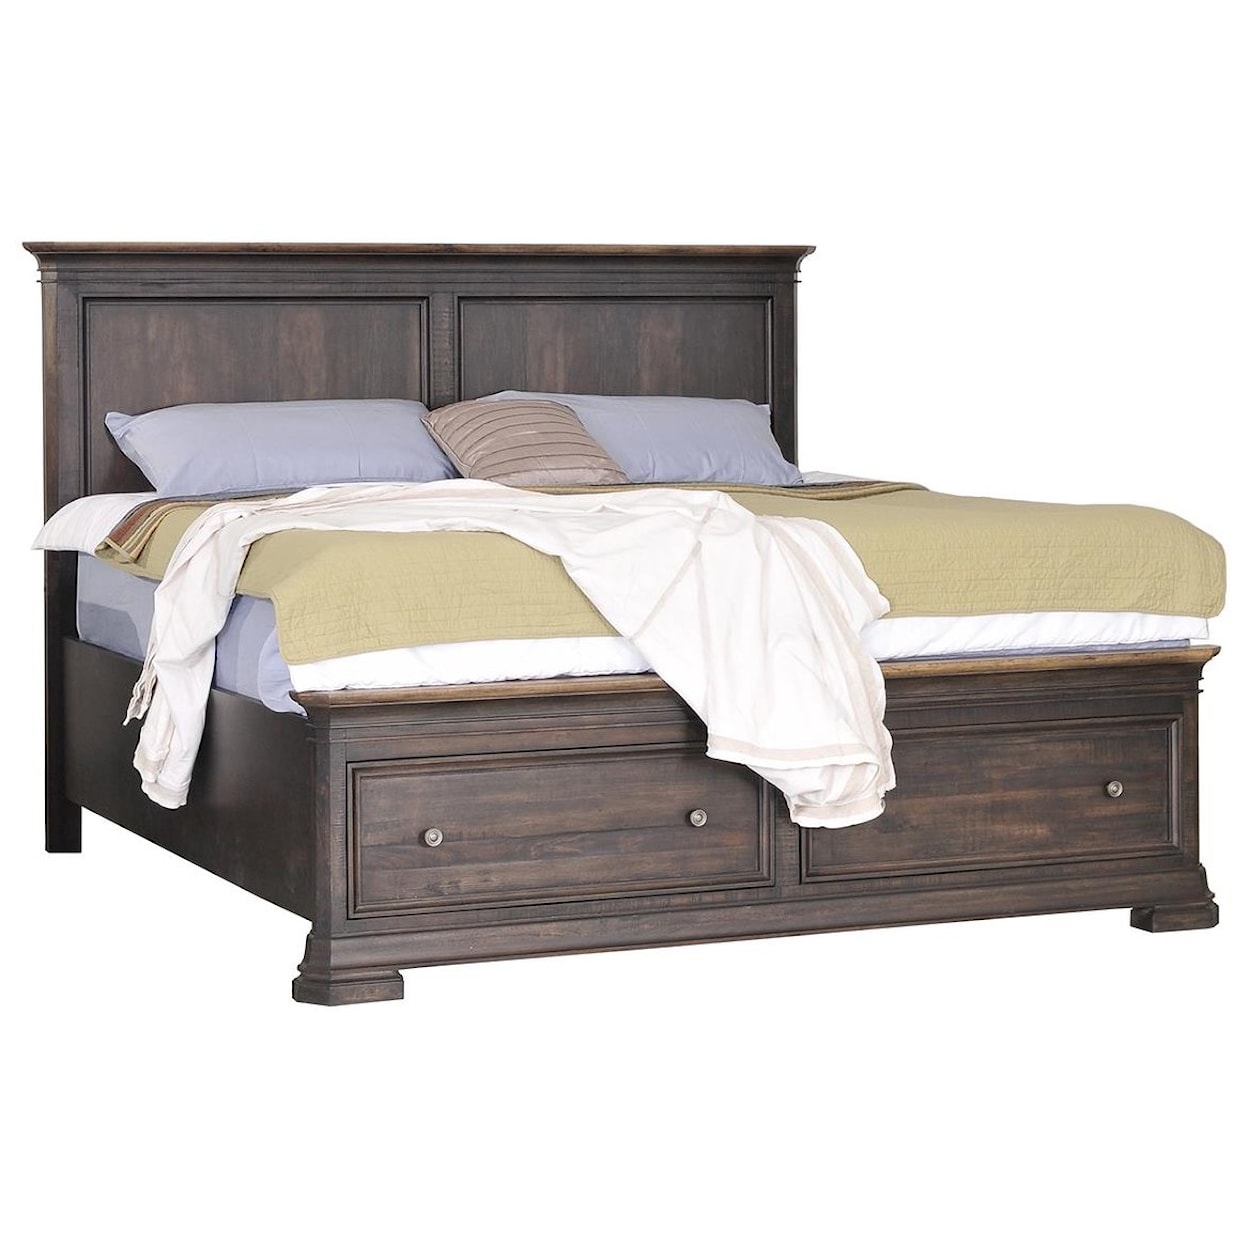 Napa Furniture Design Grand Louie King Panel Bed with Storage Footboard